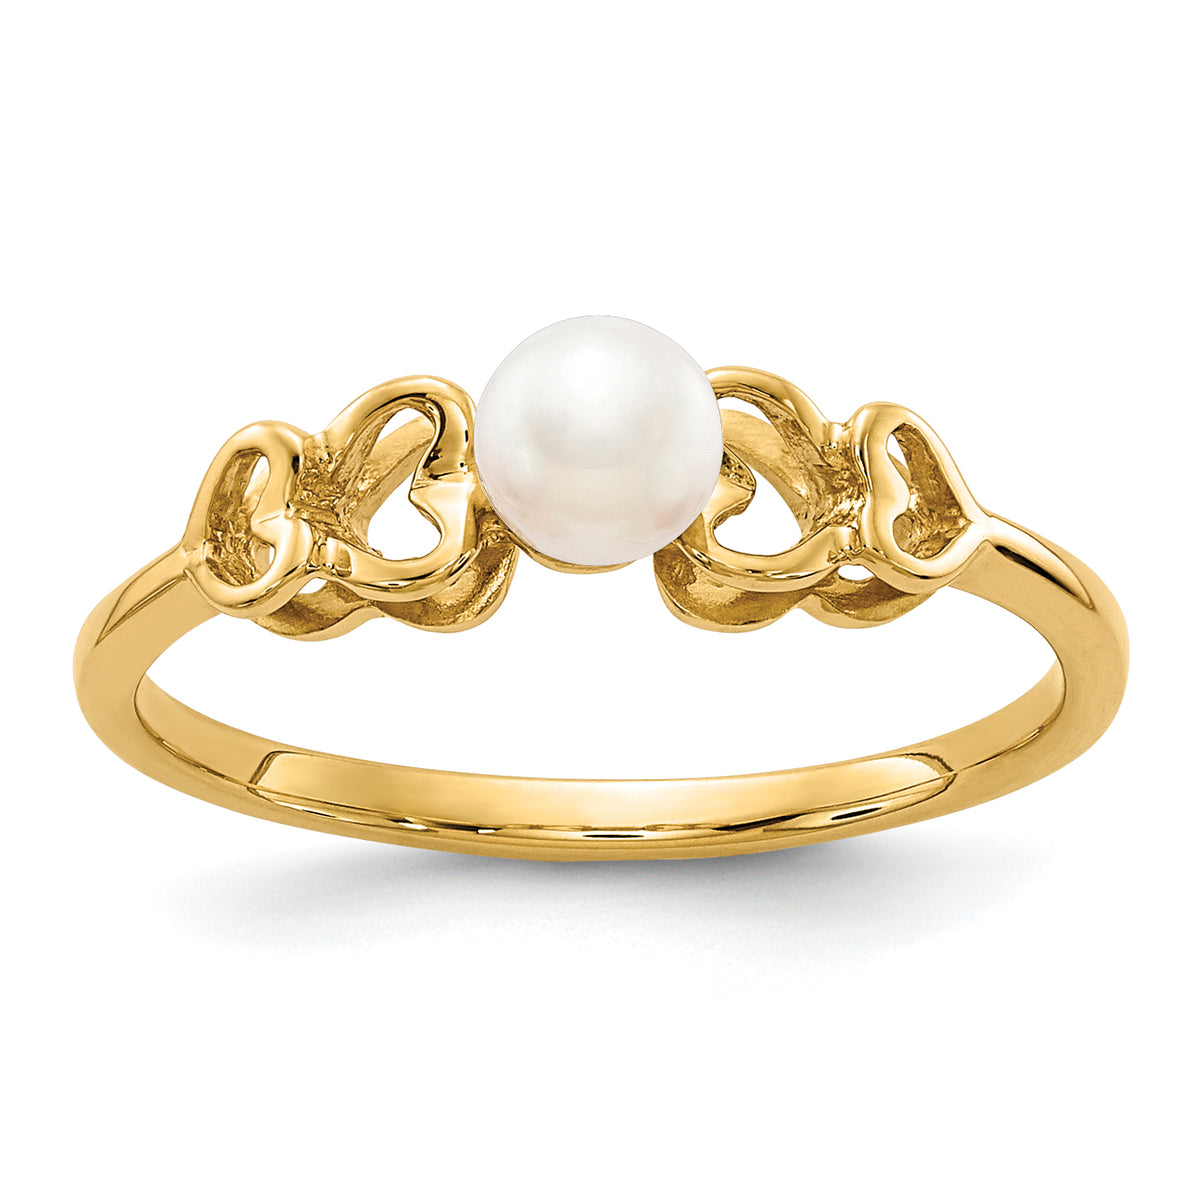 10K 4mm Fresh Water Cultured Pearl Ring